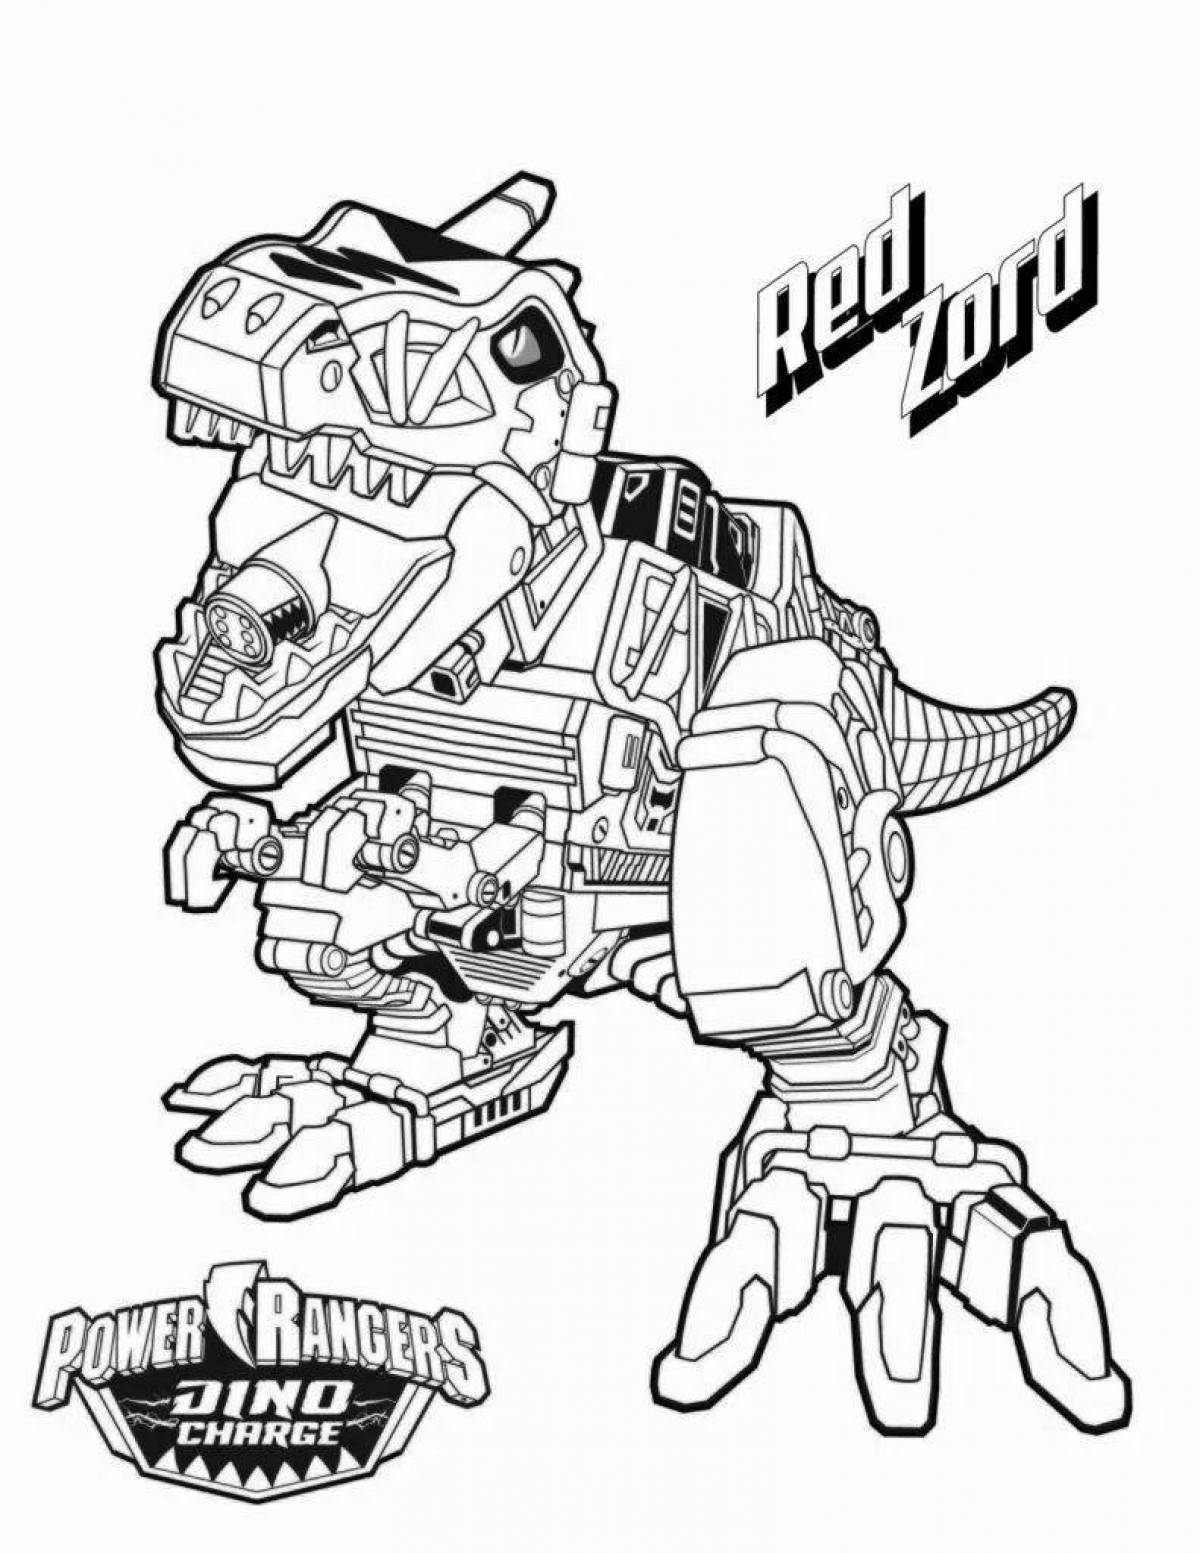 Innovative cool robot coloring page for boys